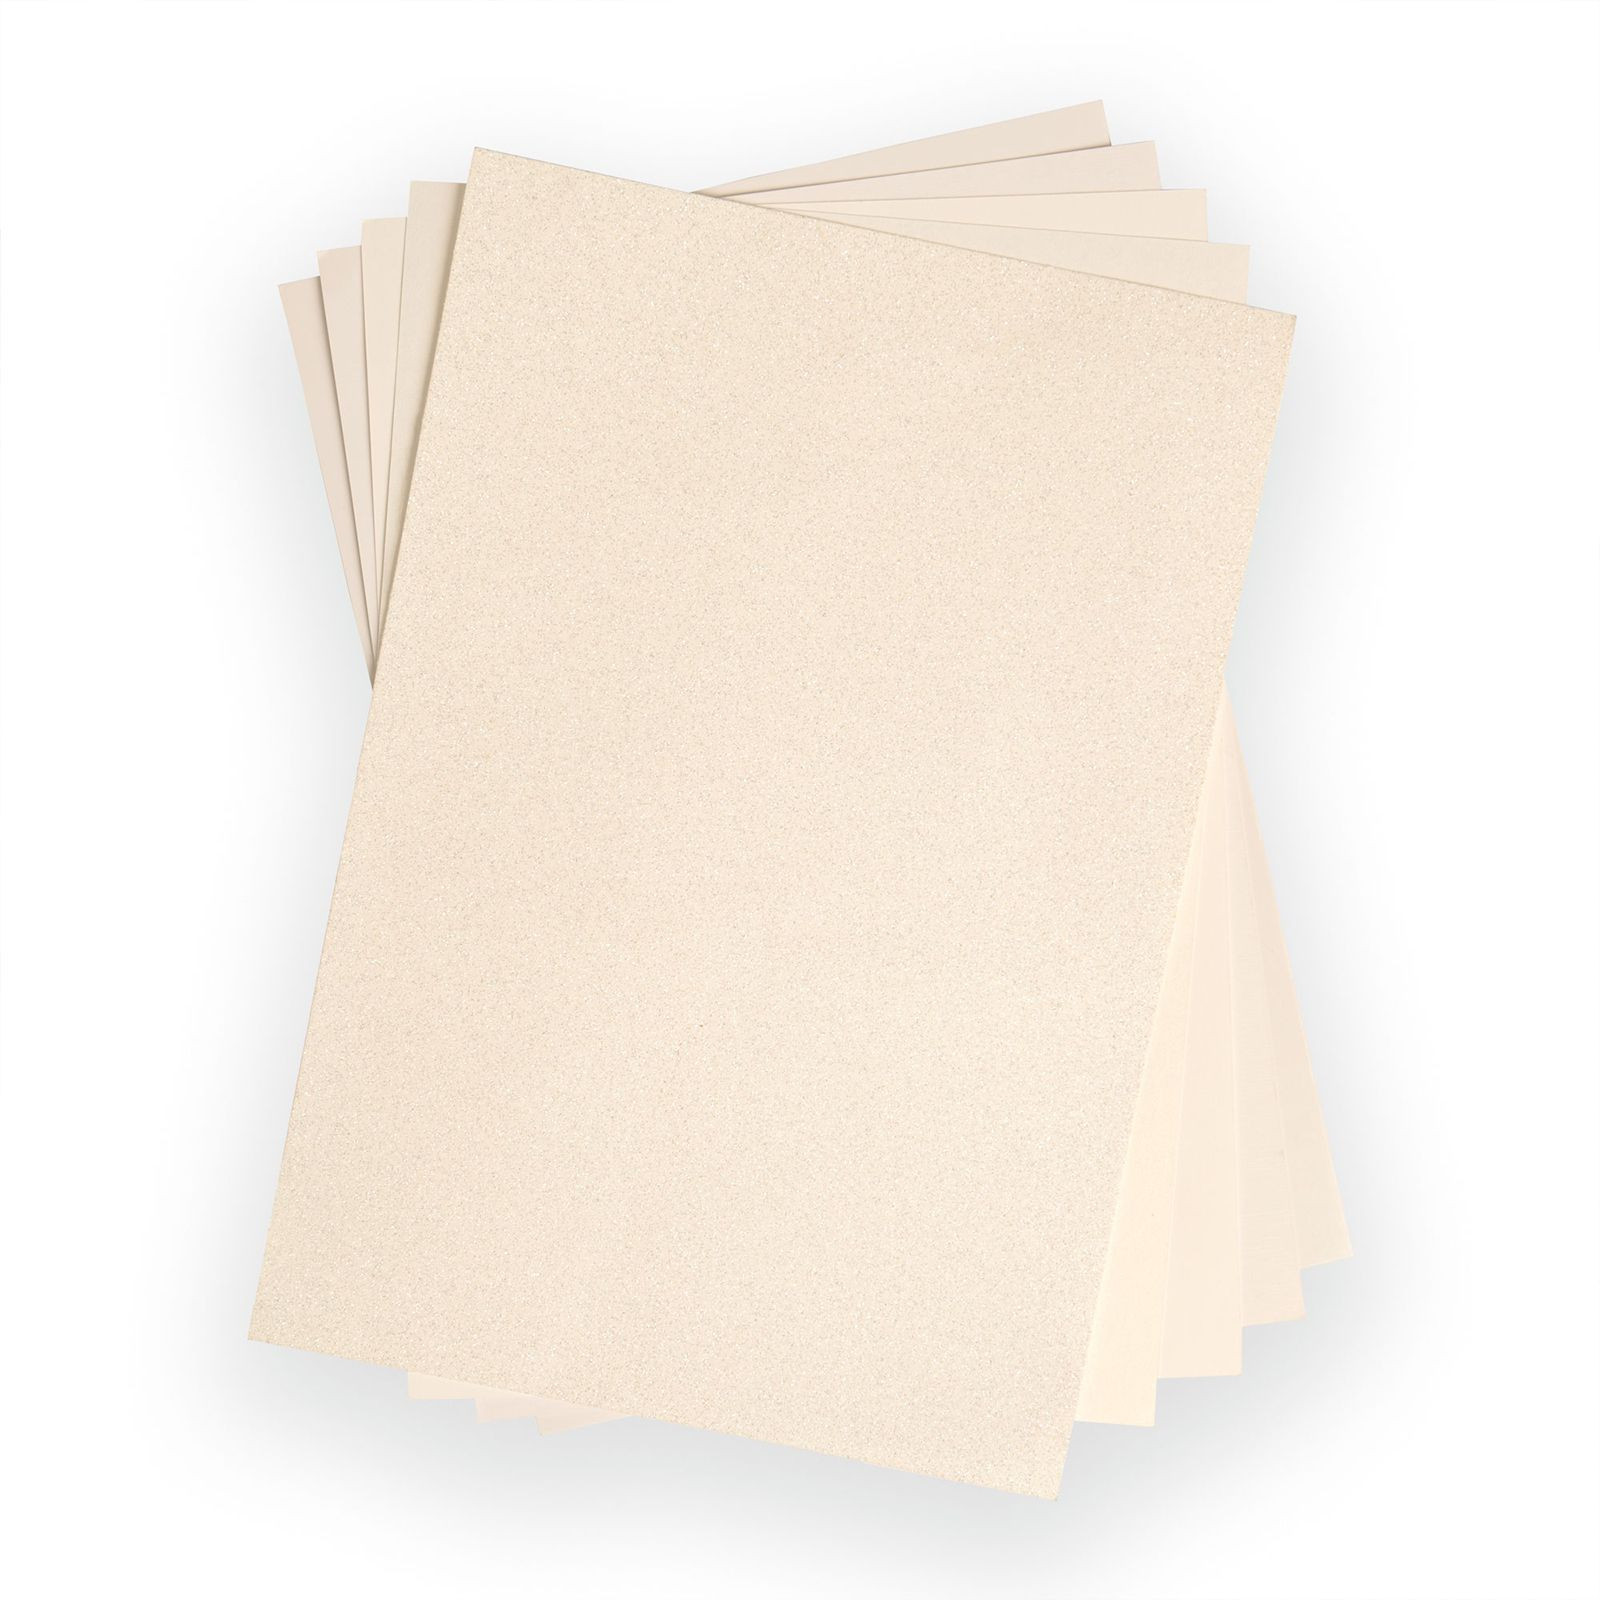 Sizzix • Surfacez Opulent Cardstock A4 Ivory 50 Sheets